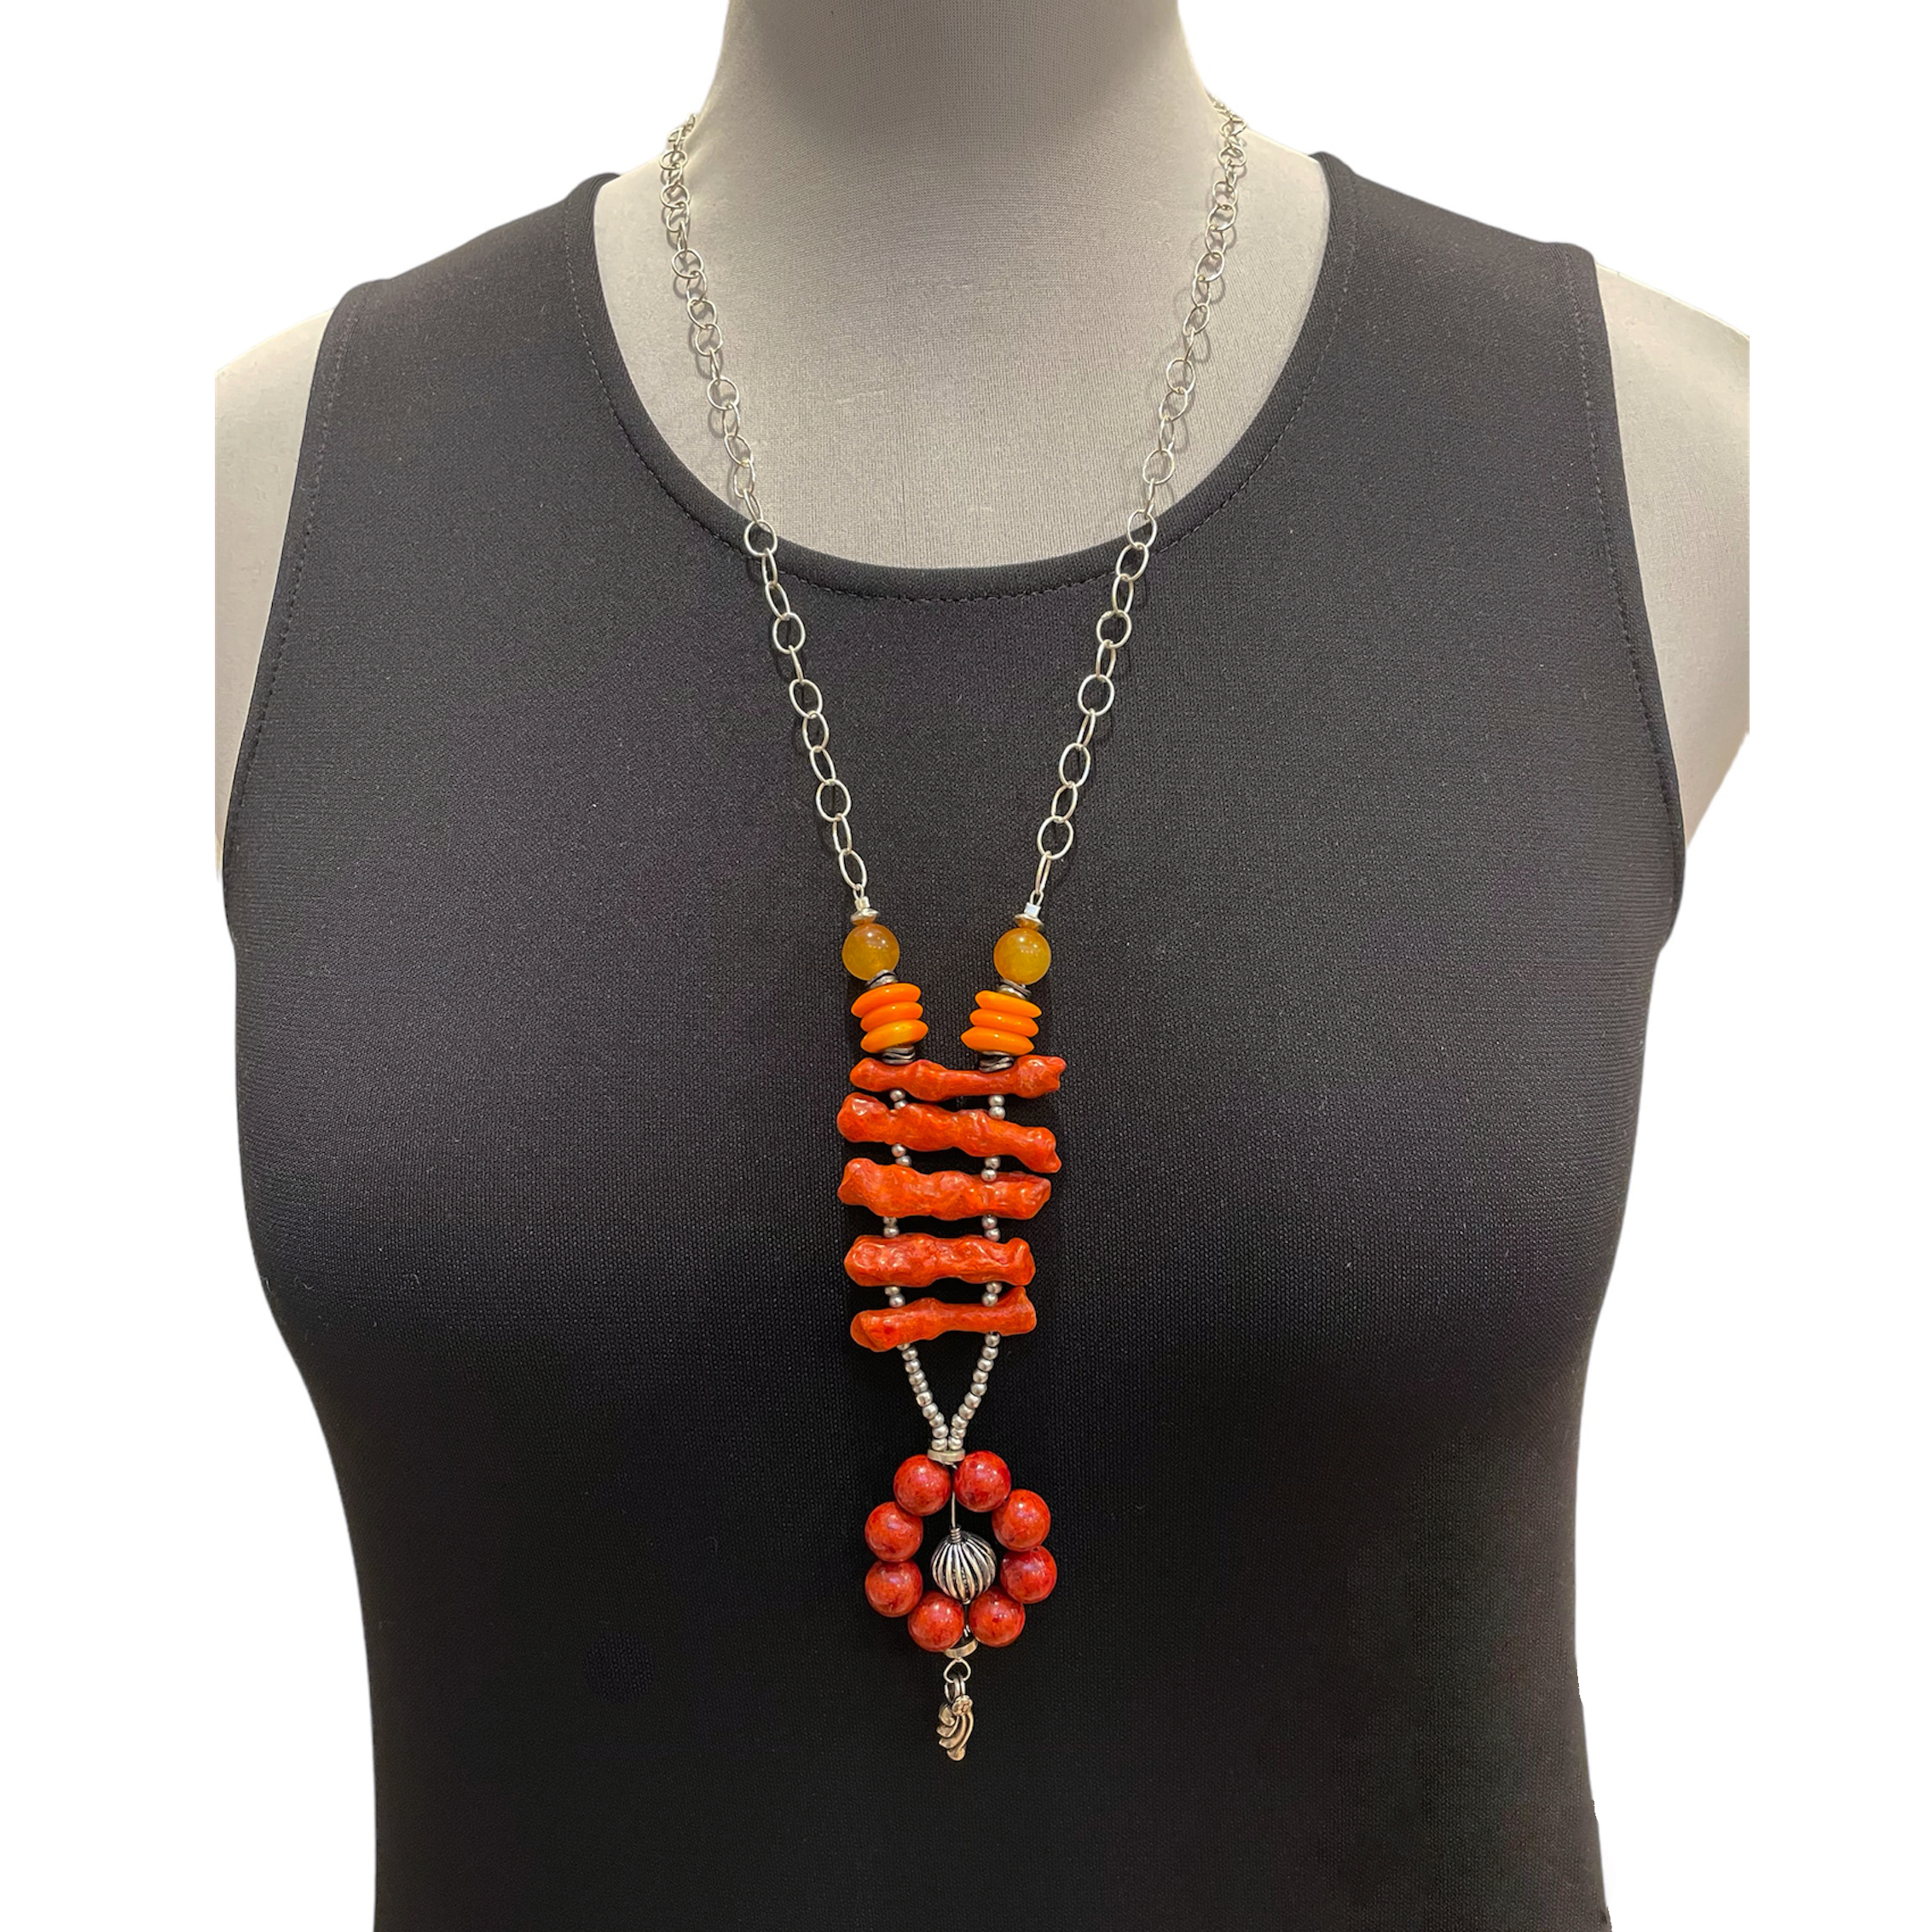 Long coral necklace